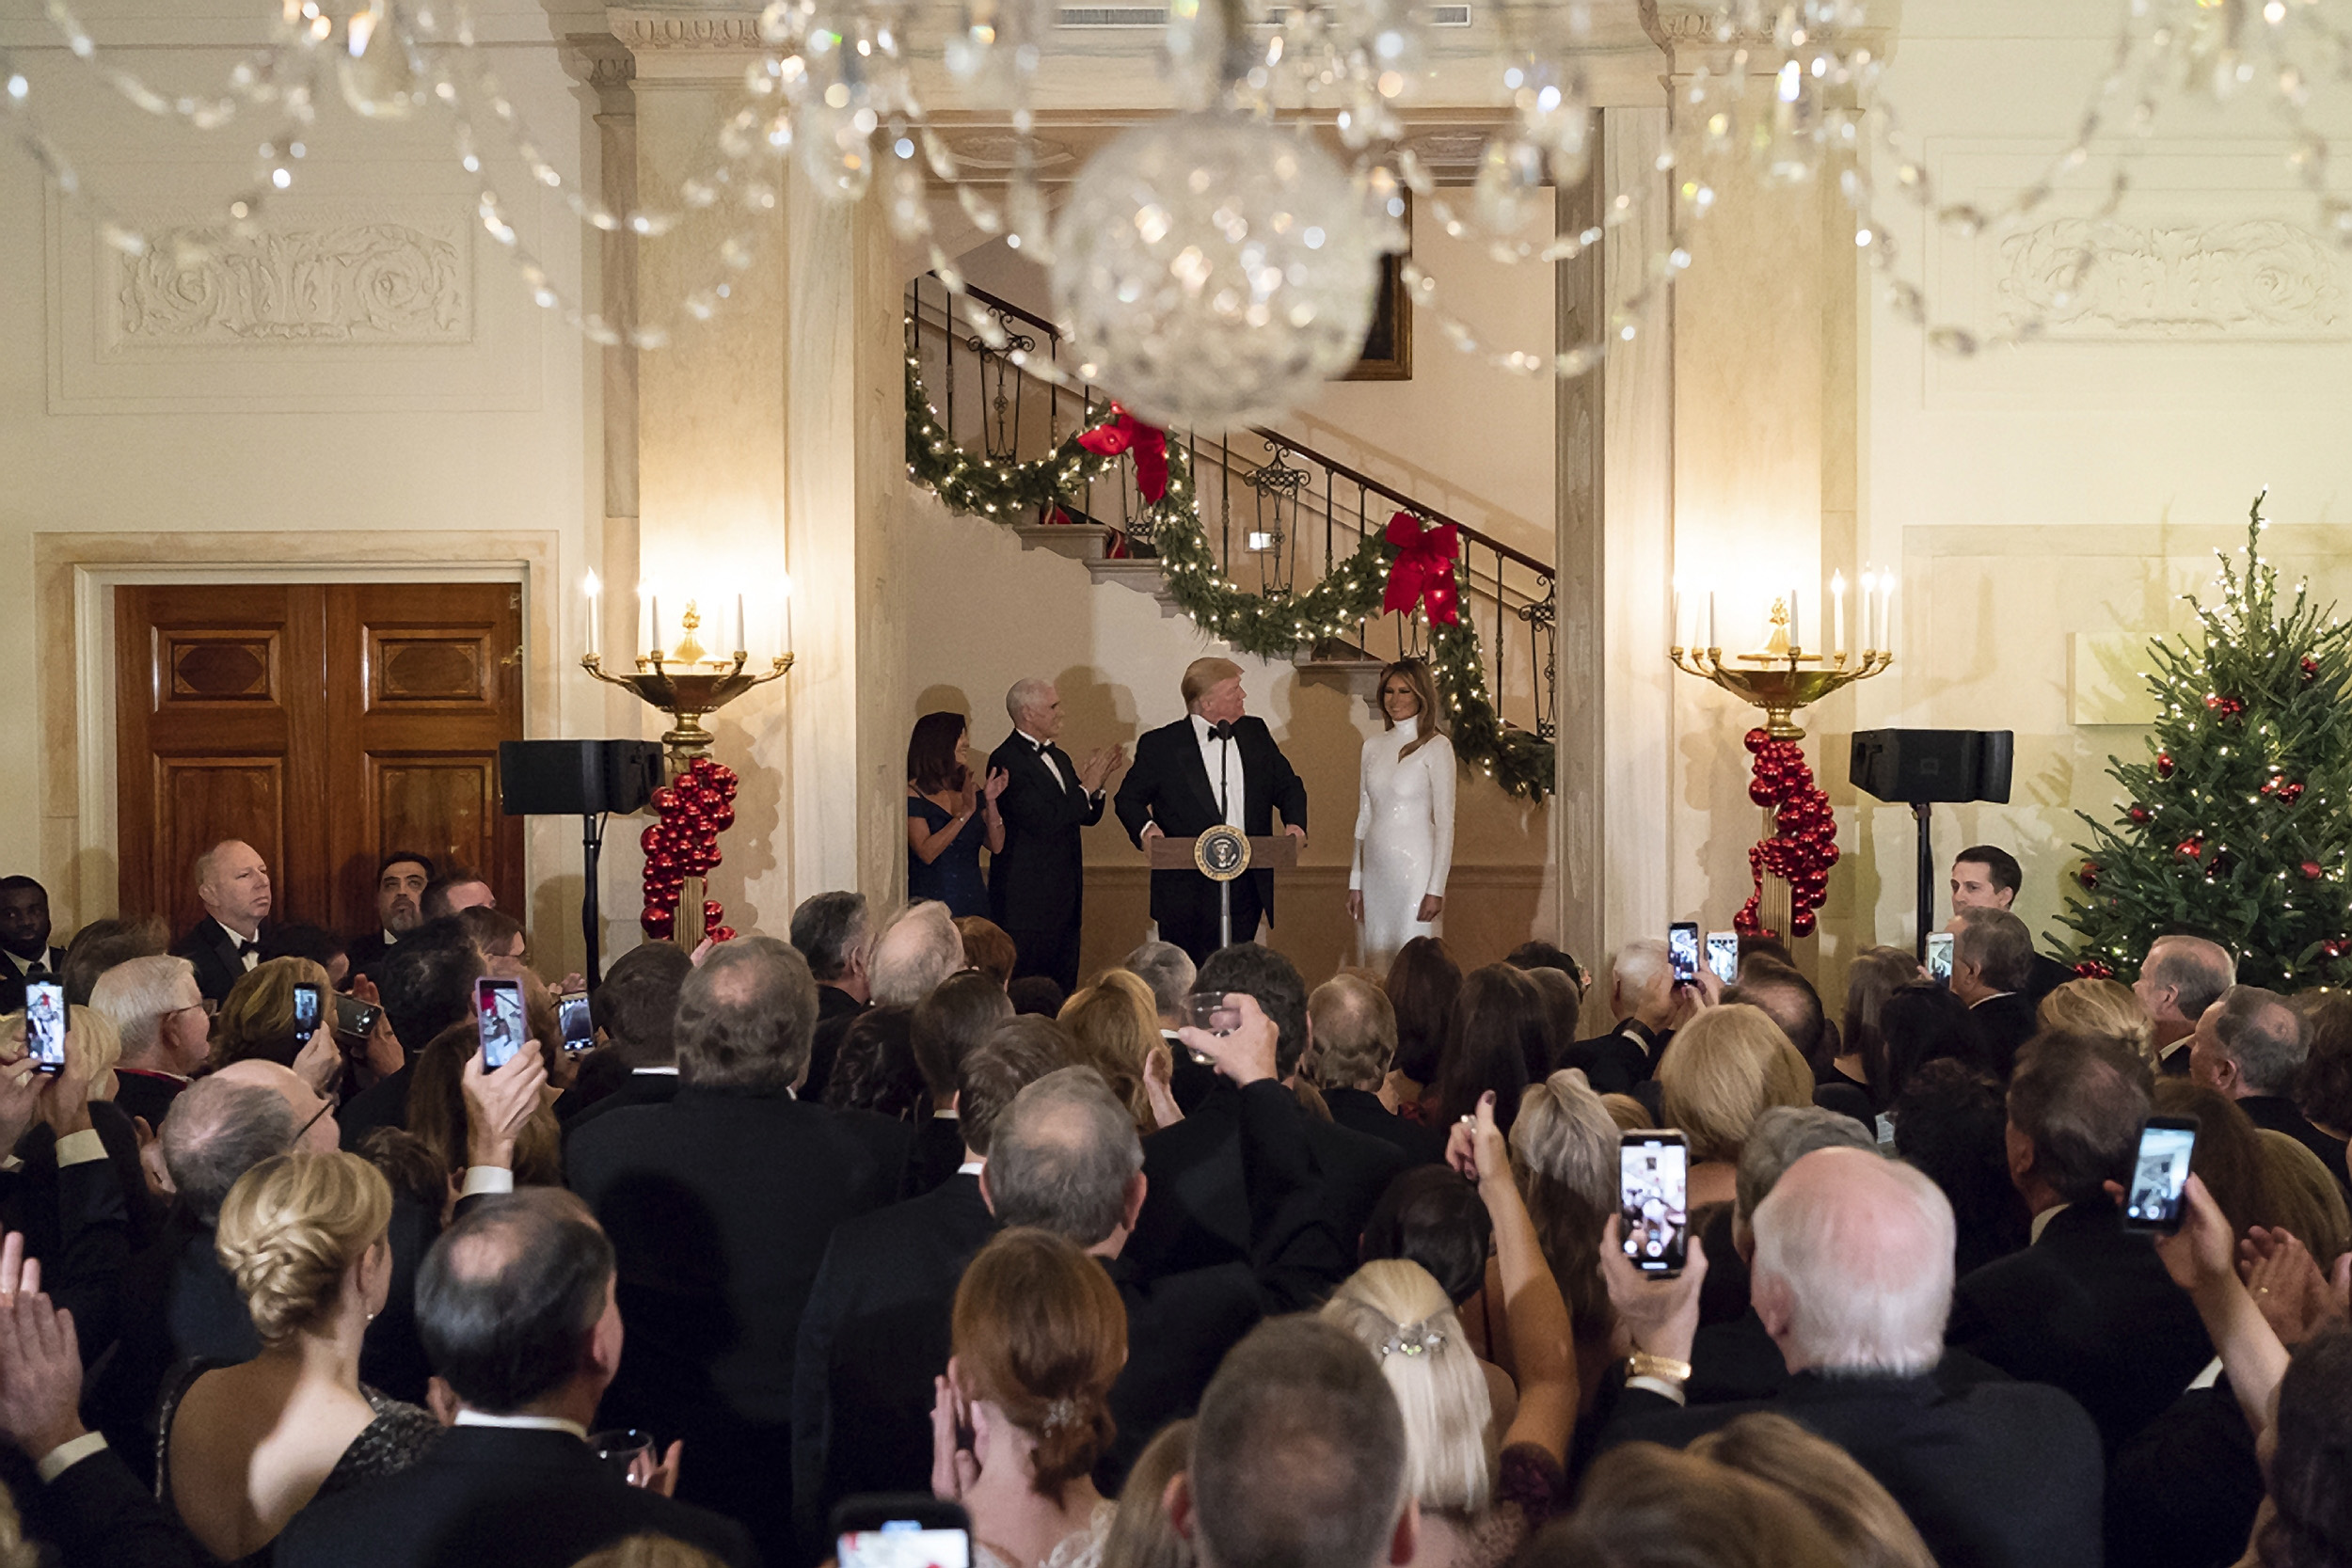 White House planning holiday parties indoors despite pandemic warnings